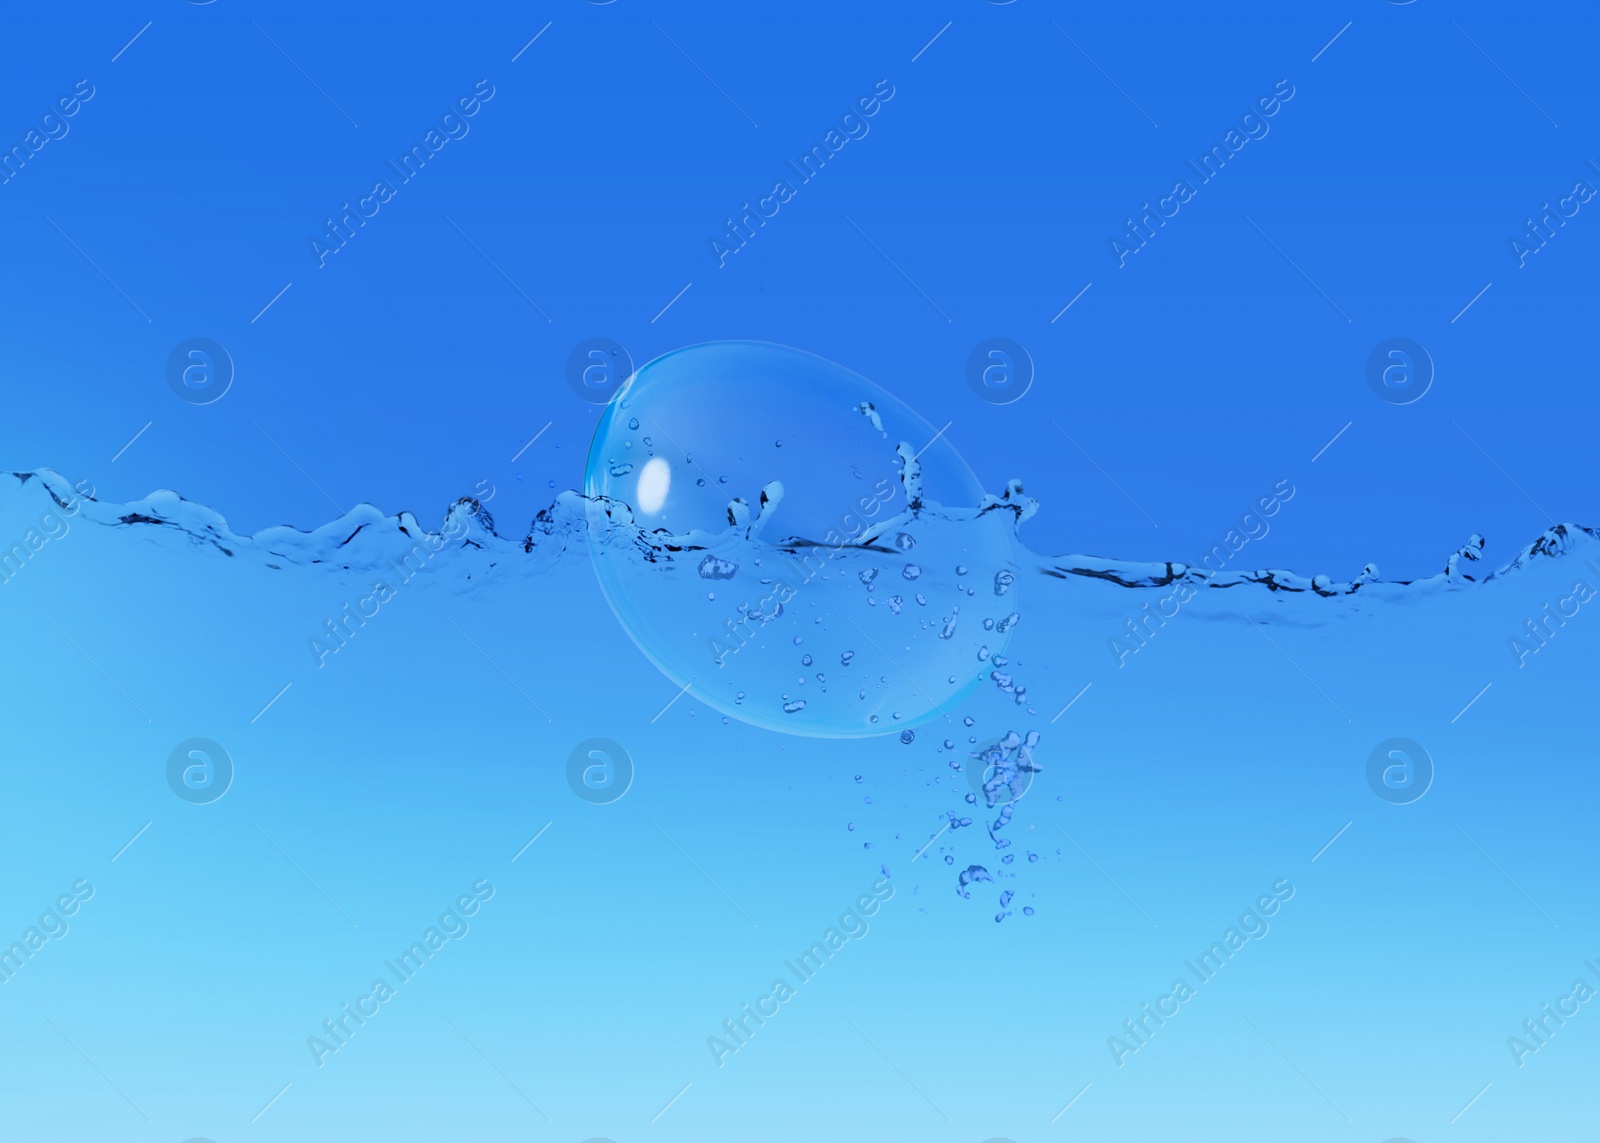 Image of Contact lens falling into solution on blue background